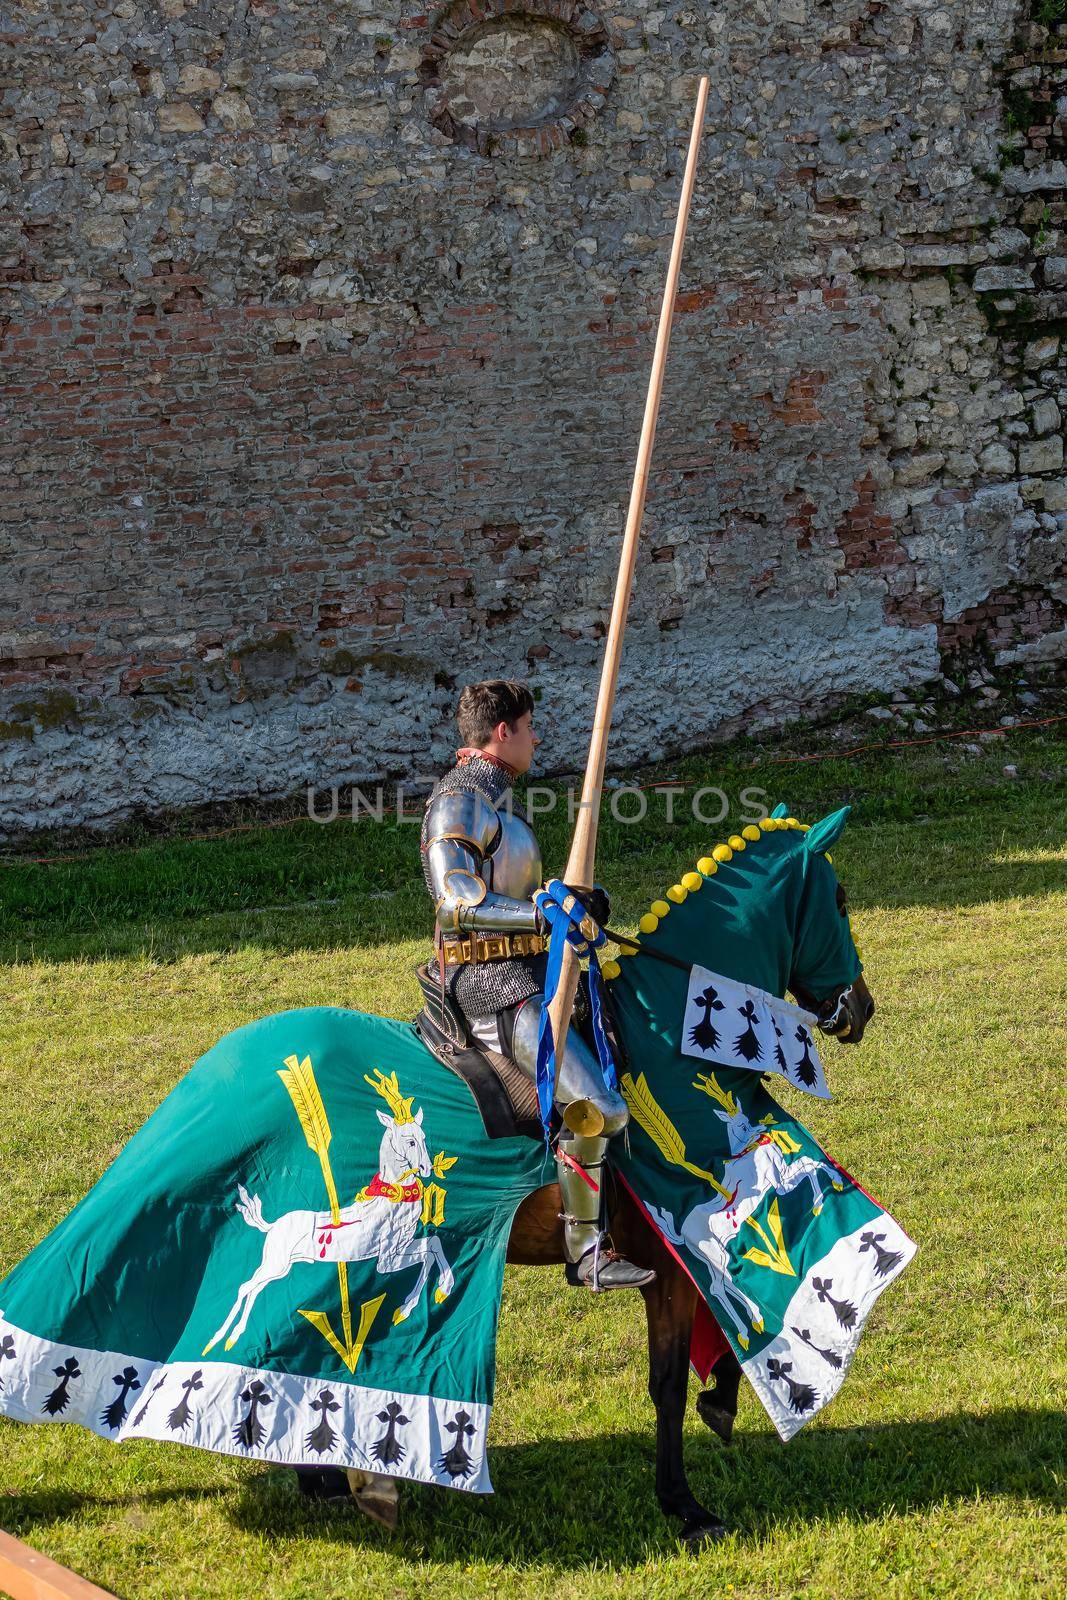 WYWAR CASTLE FEST, demonstrations of knightly fights Knight on a horse with a spear, waiting for an opponent